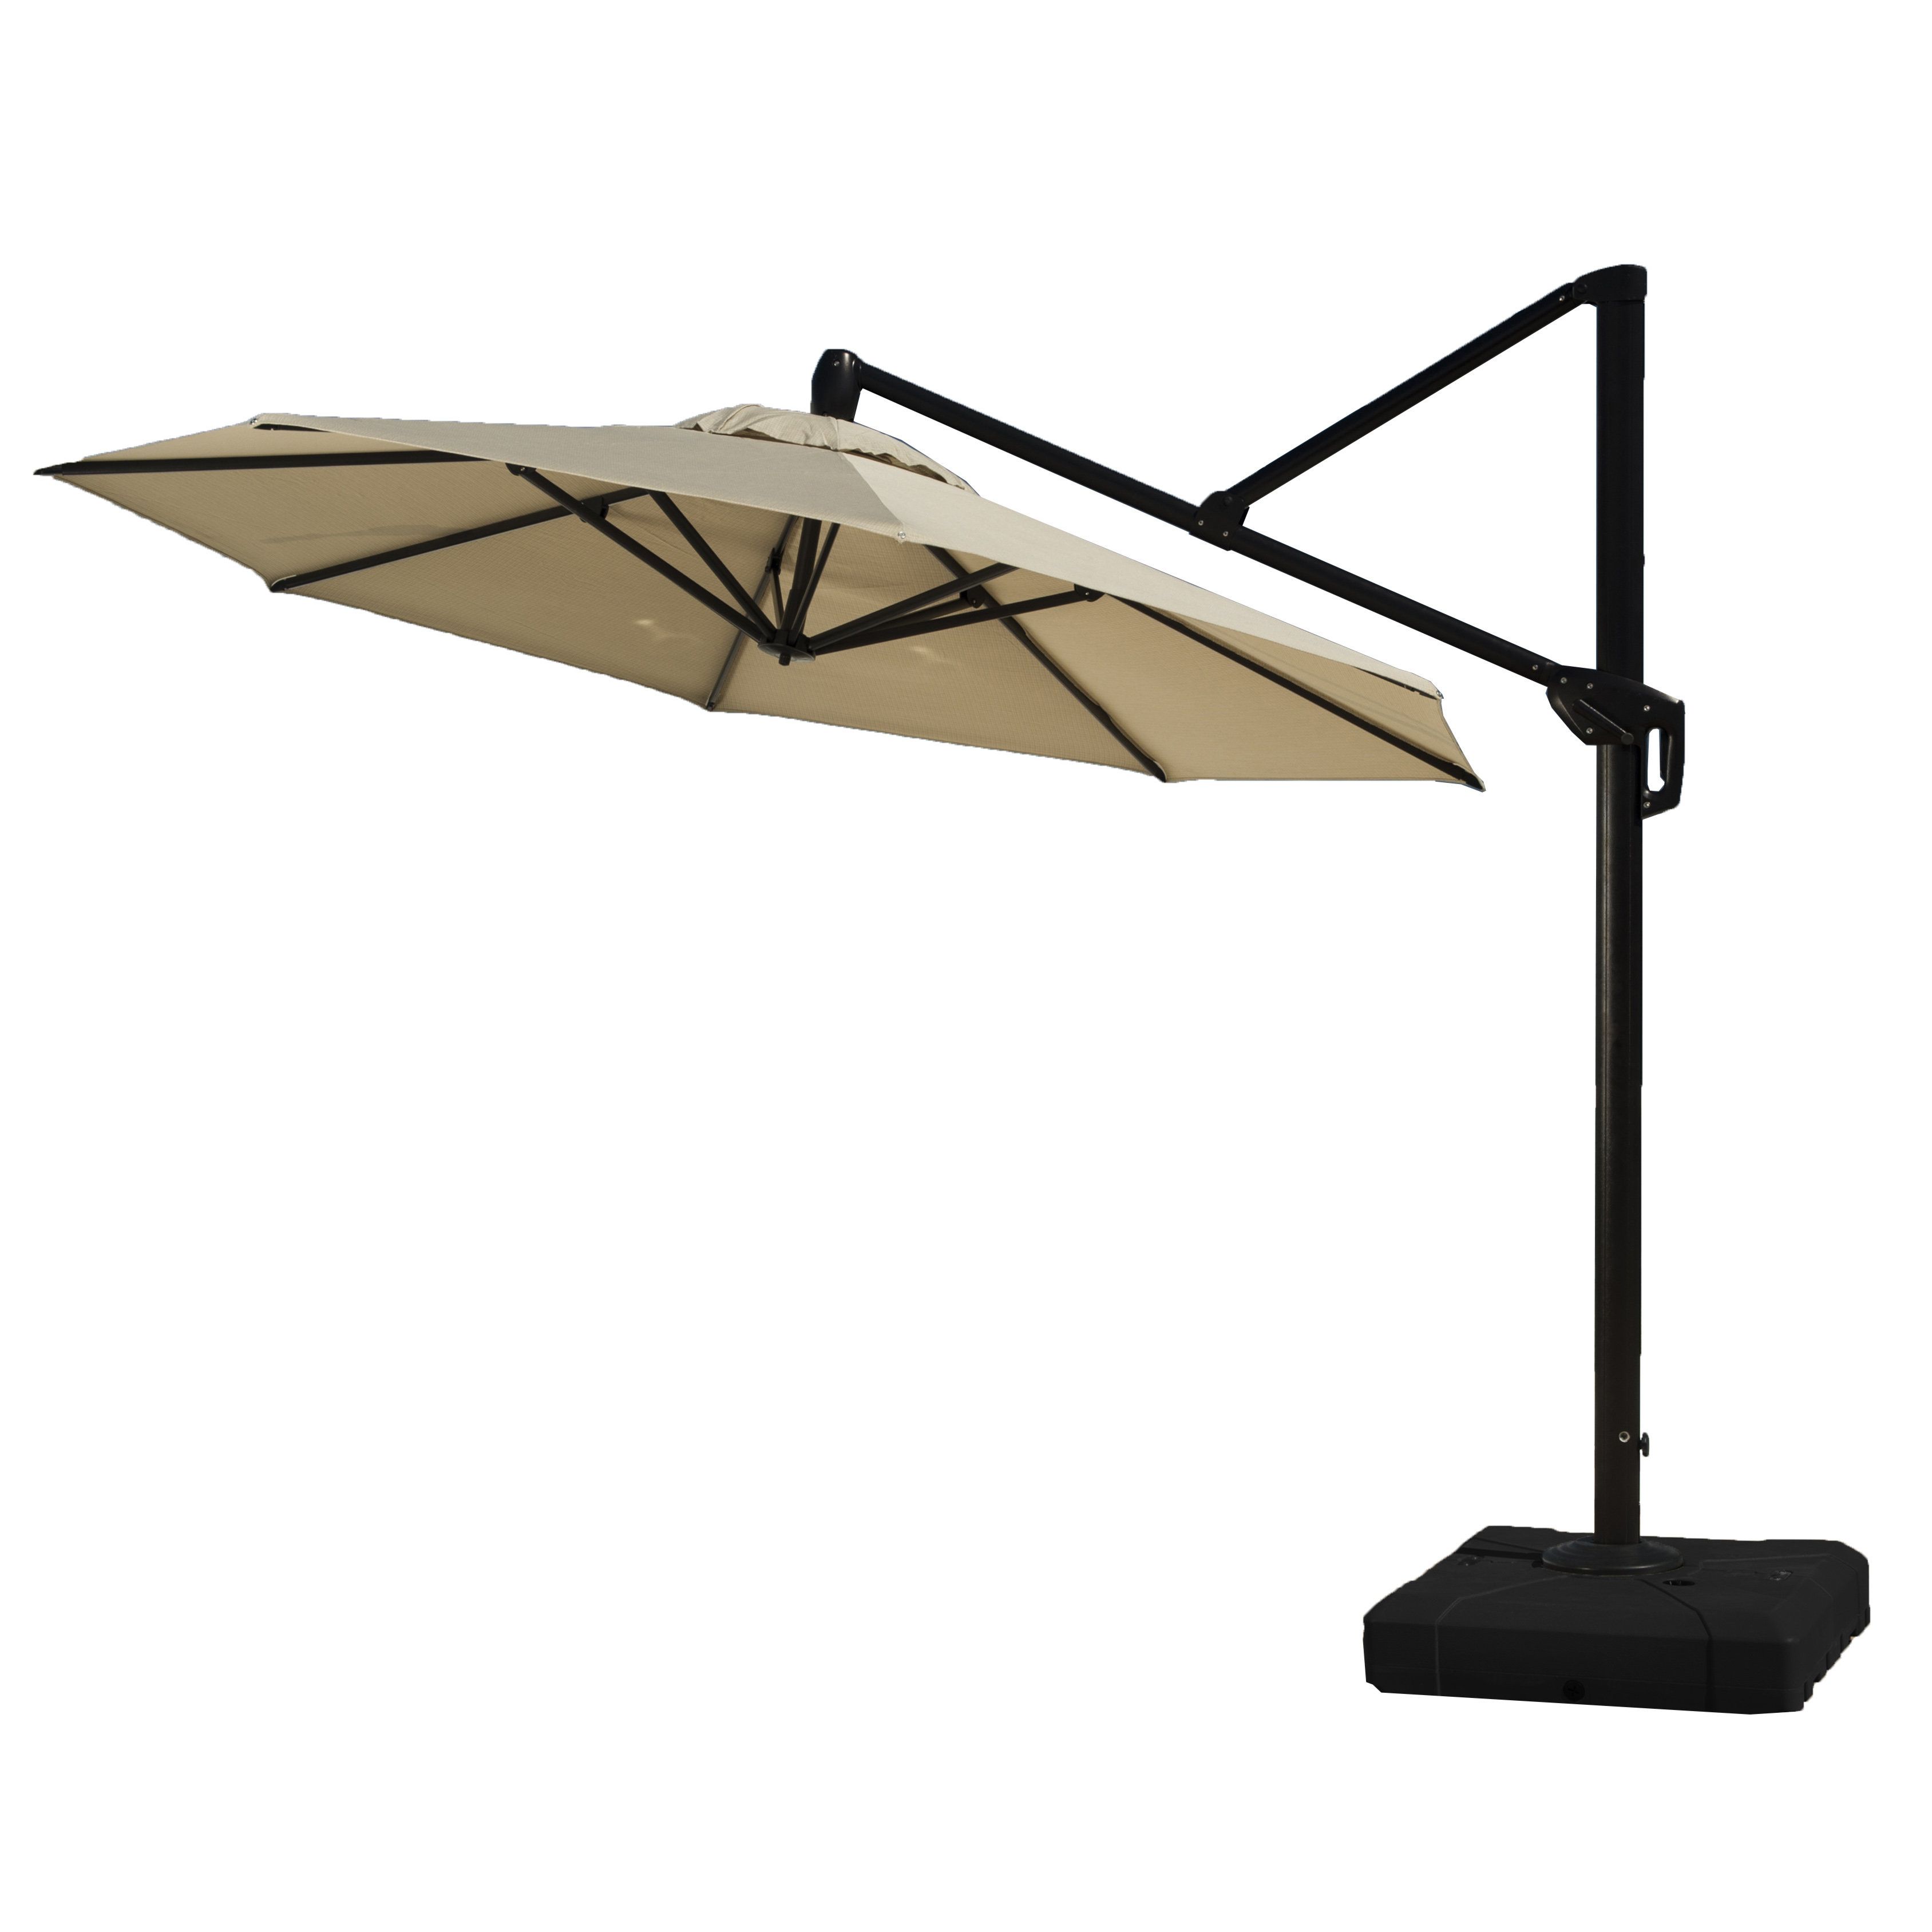 Fashionable Sol 72 Outdoor Ceylon 10' Cantilever Sunbrella Umbrella Inside Voss Cantilever Sunbrella Umbrellas (View 10 of 20)